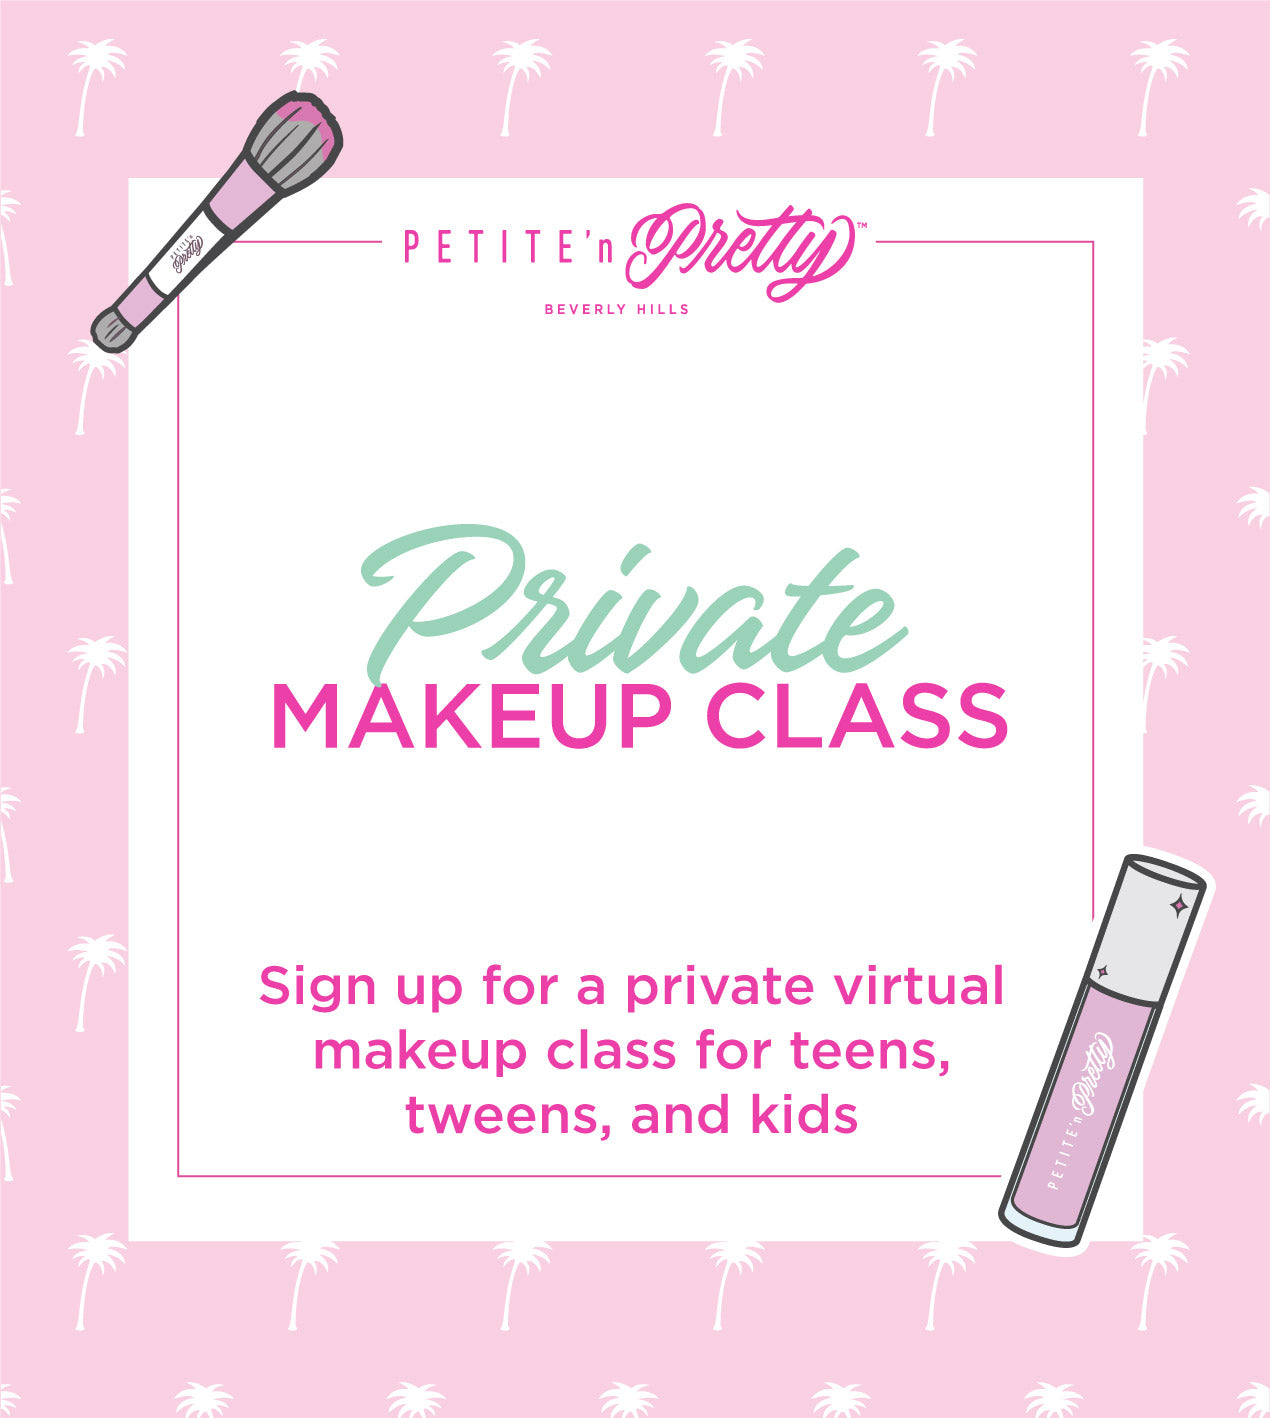 Private Makeup Class - Petite 'n Pretty - A beauty brand leading the  Sparkle Revolution!